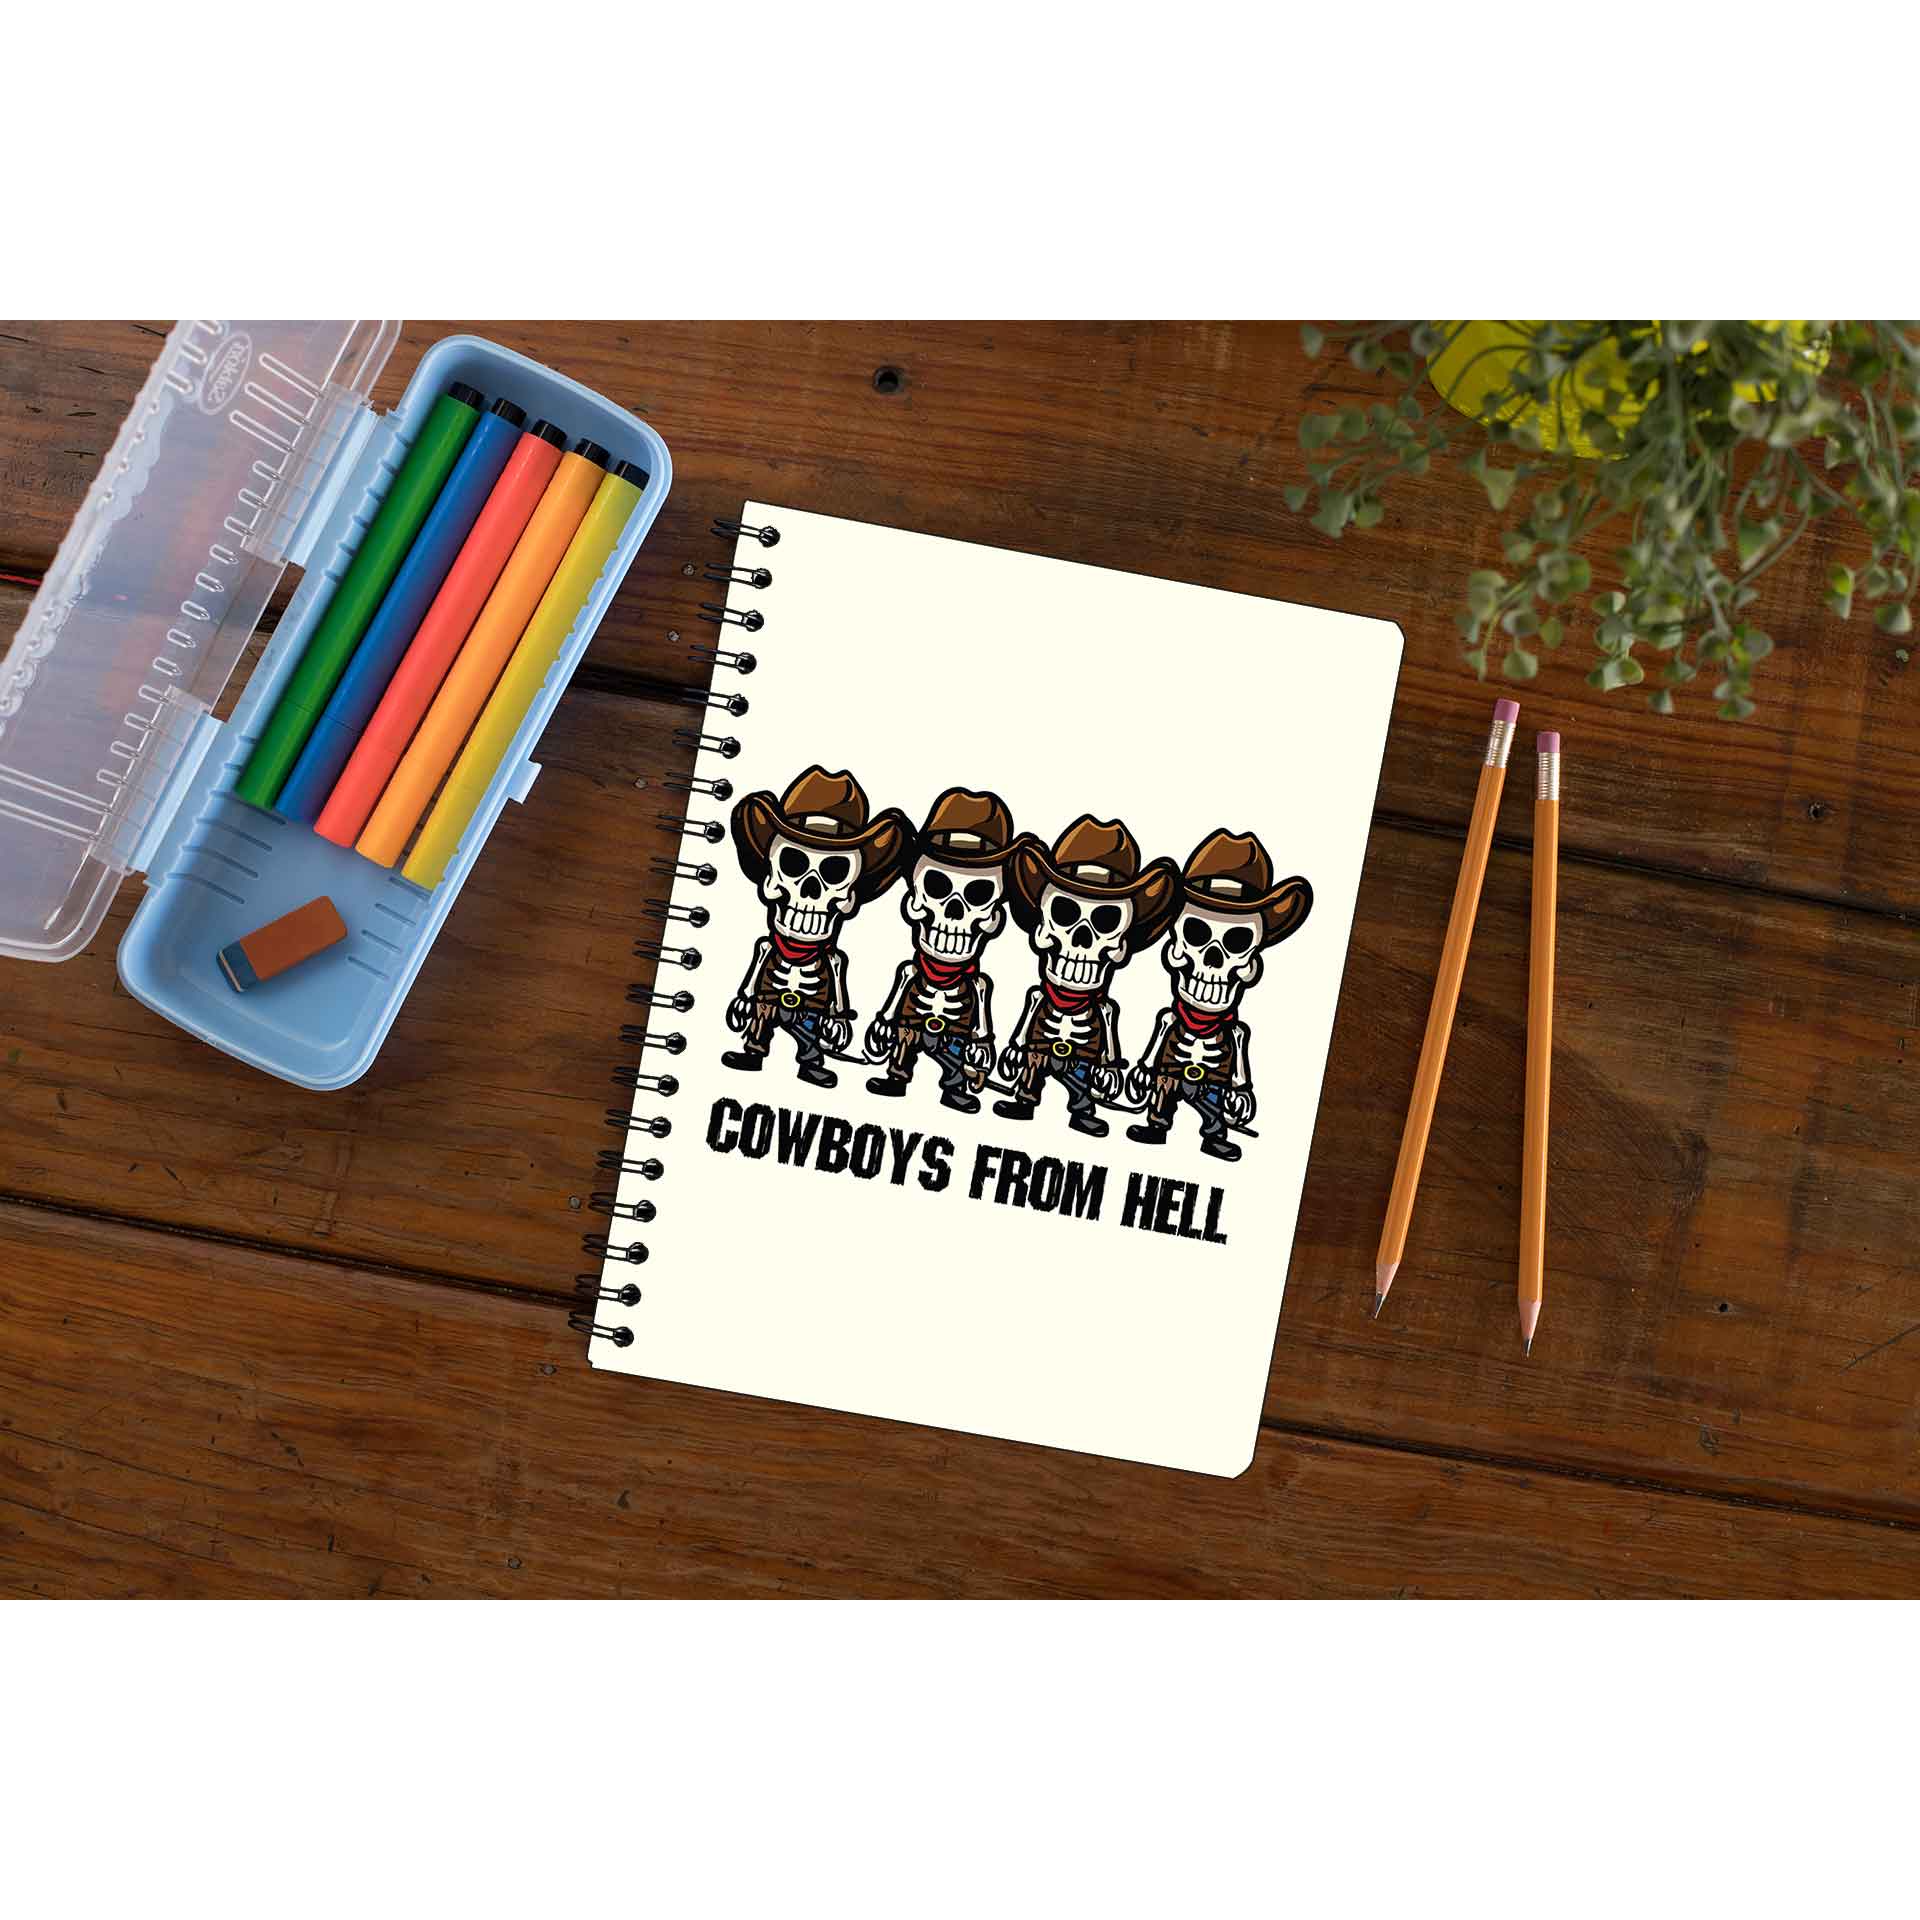 pantera cowboys from hell toon notebook notepad diary buy online united states of america usa the banyan tee tbt unruled